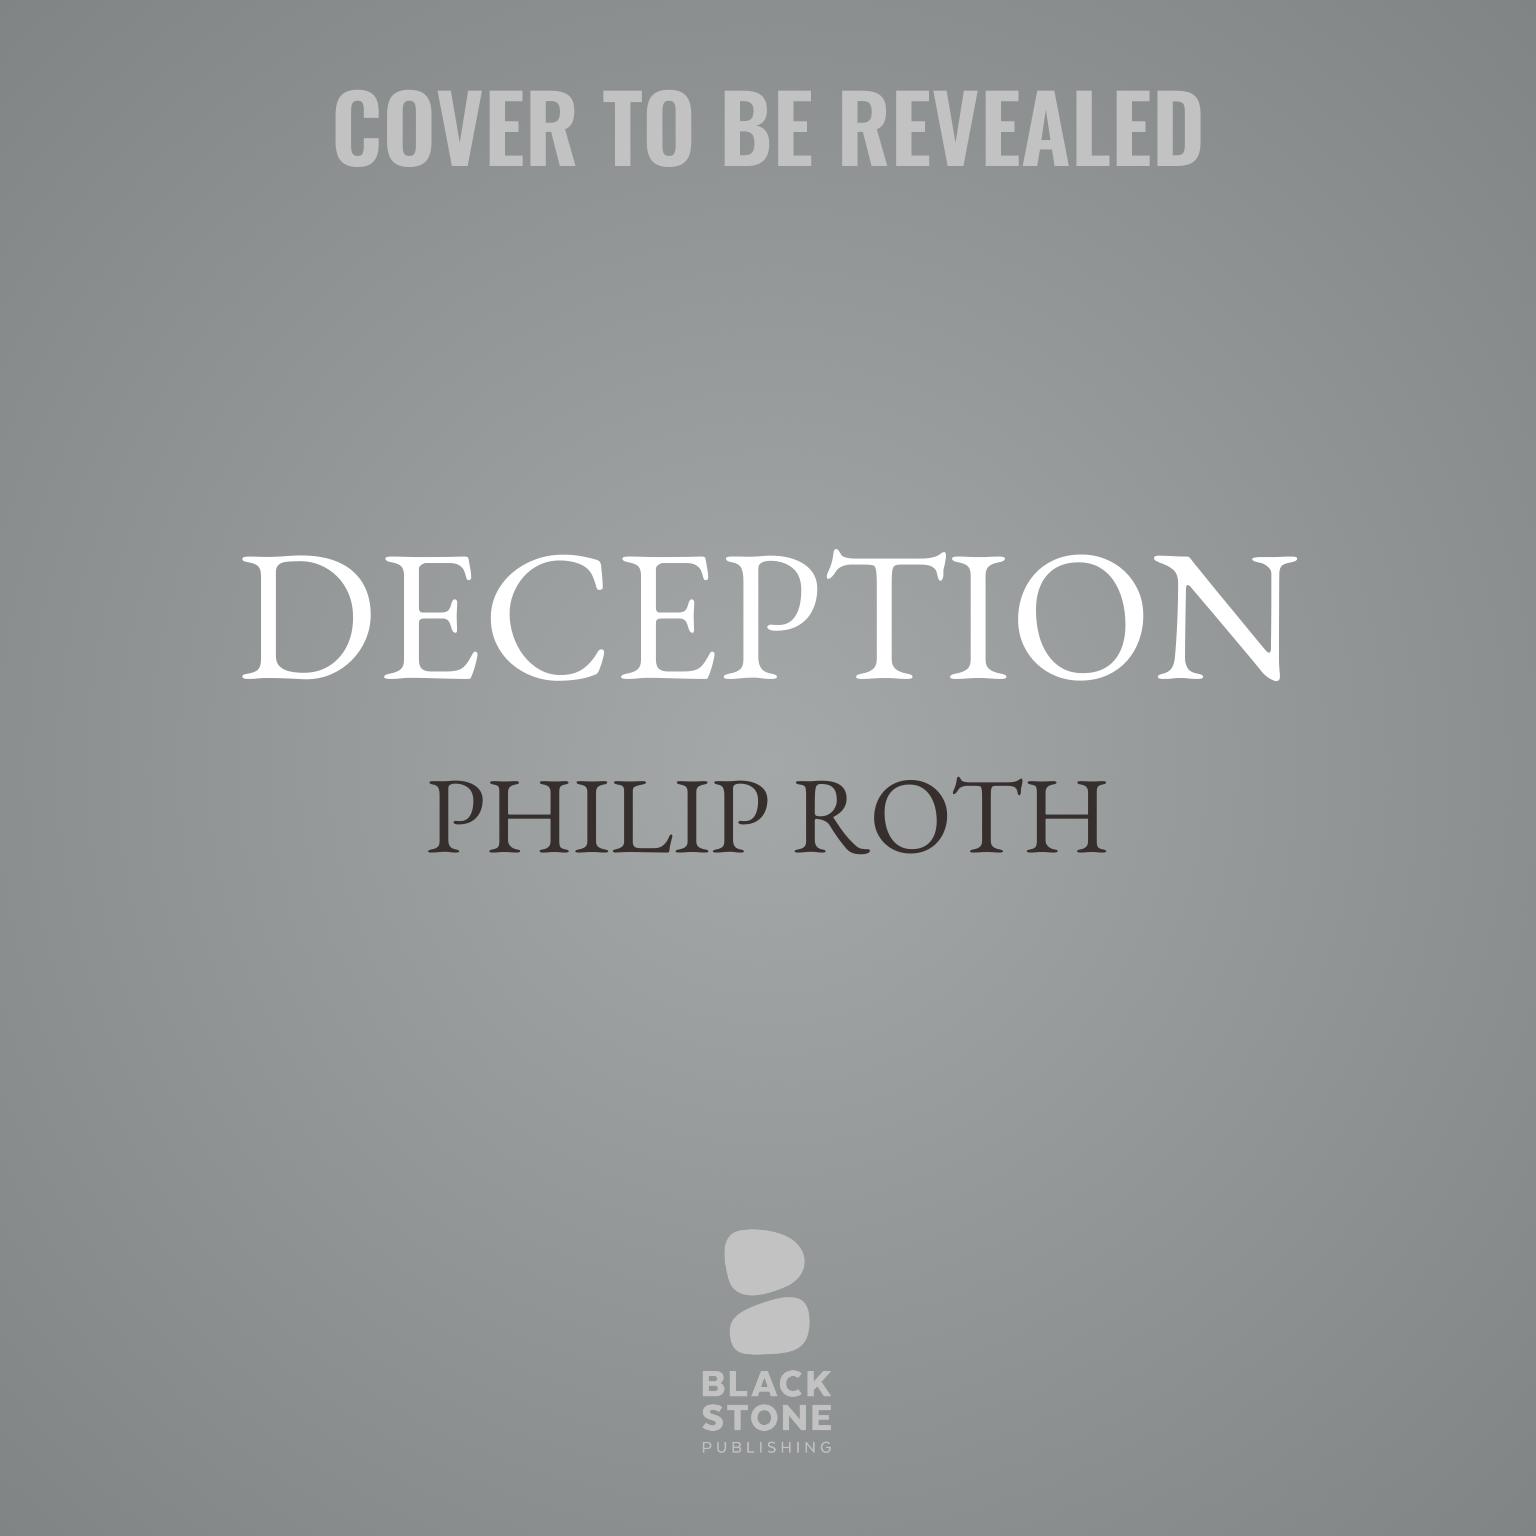 Deception Audiobook, by Philip Roth